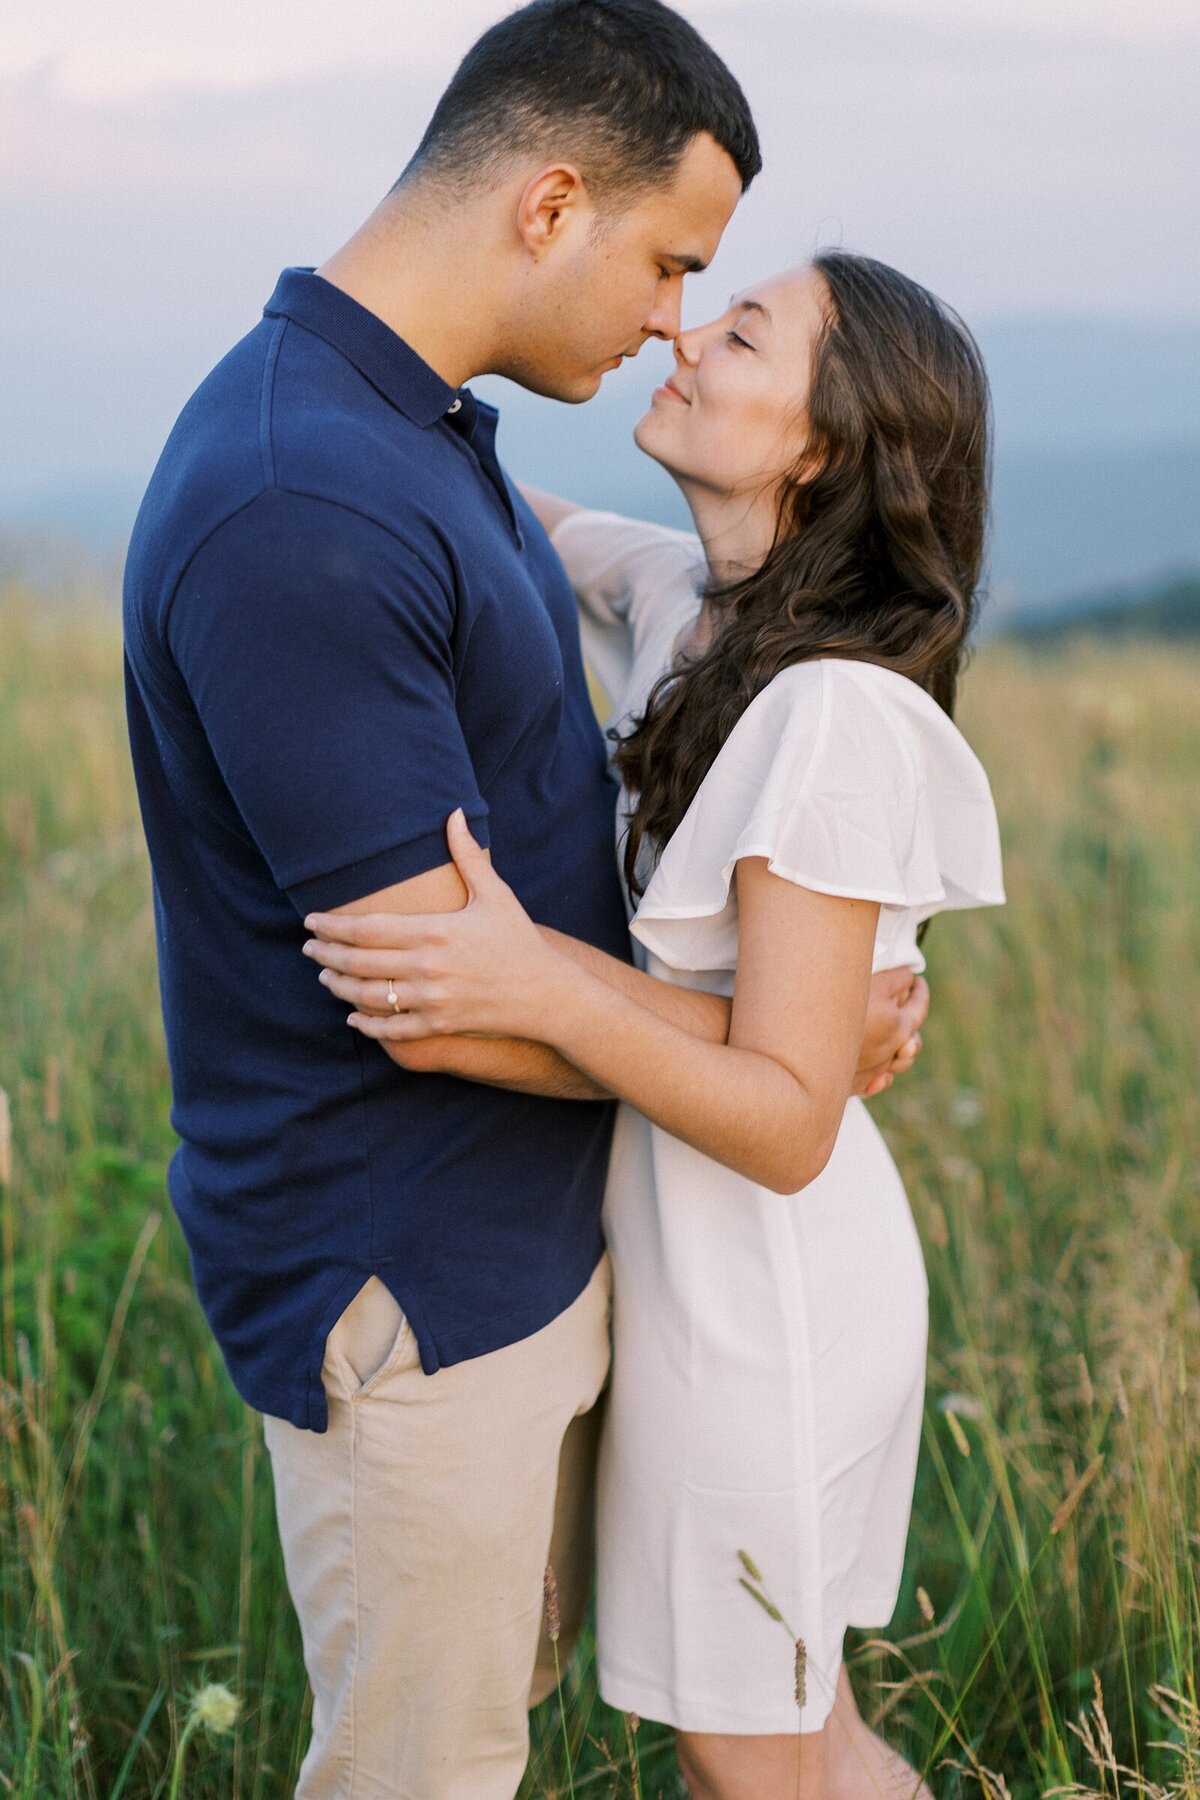 G+J Max Patch North Carolina Engagement Session Casie Marie Photography-8